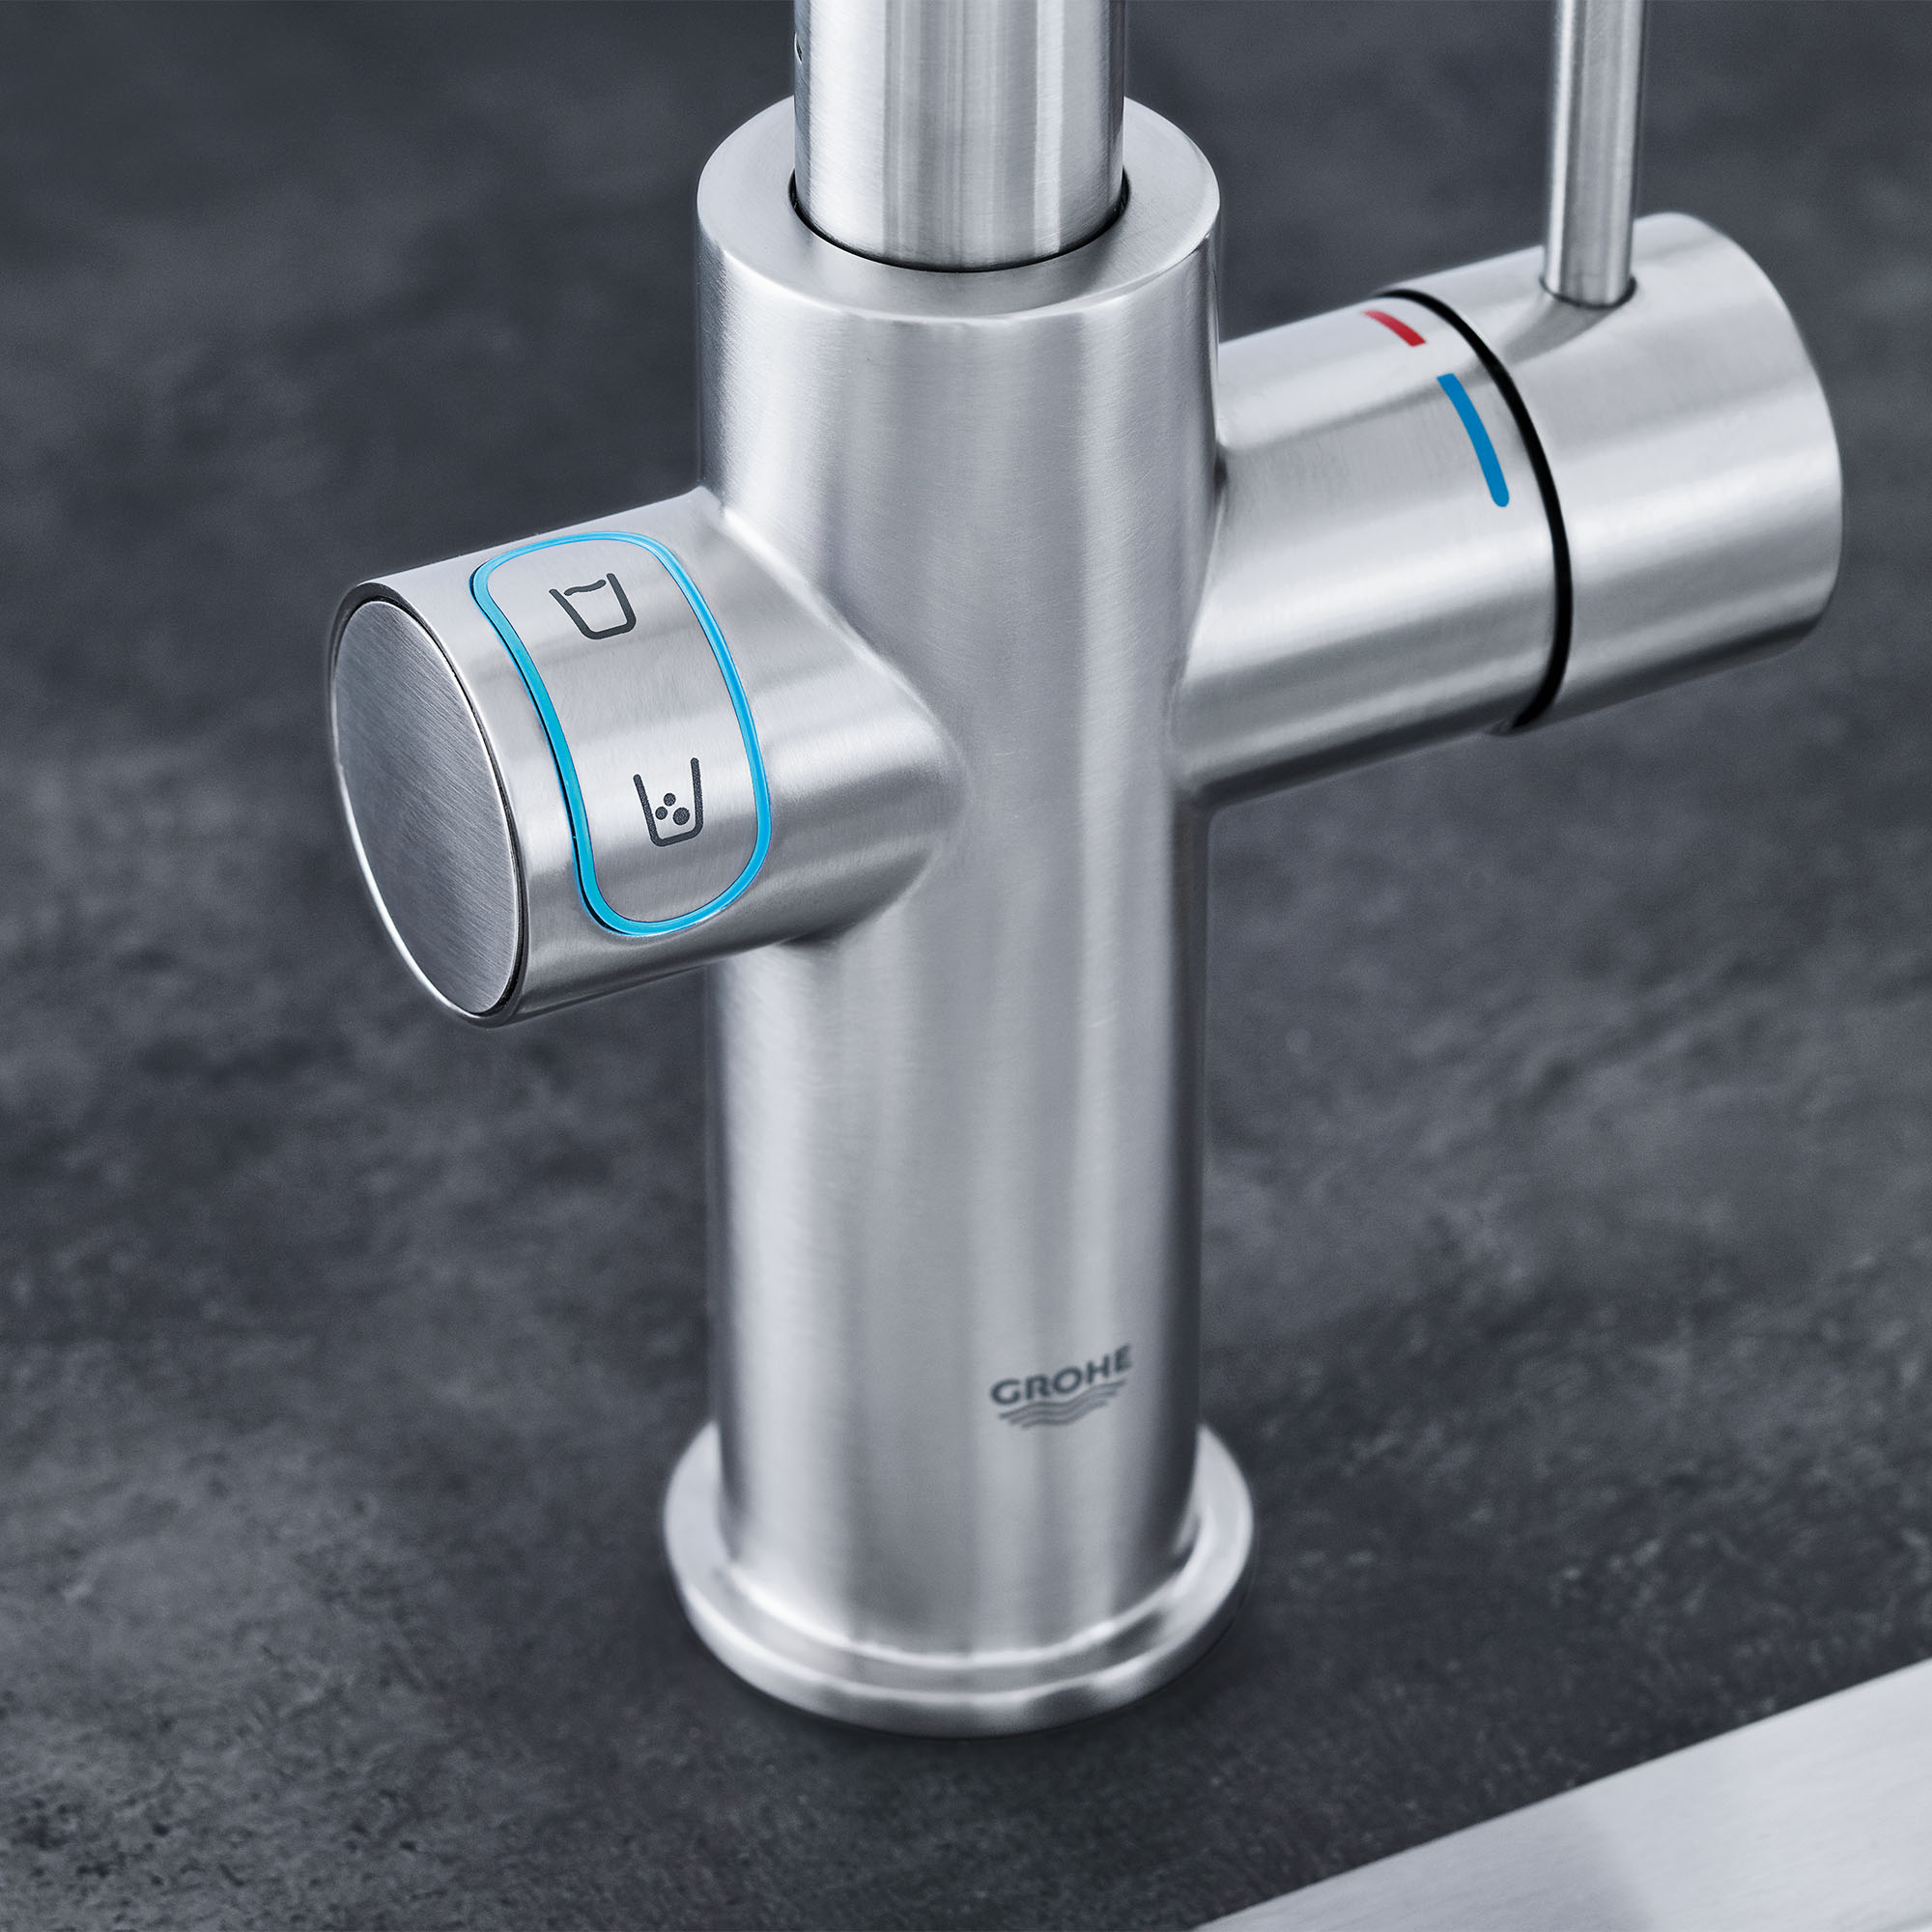 Installation of the GROHE Blue Professional with pull-out spout 